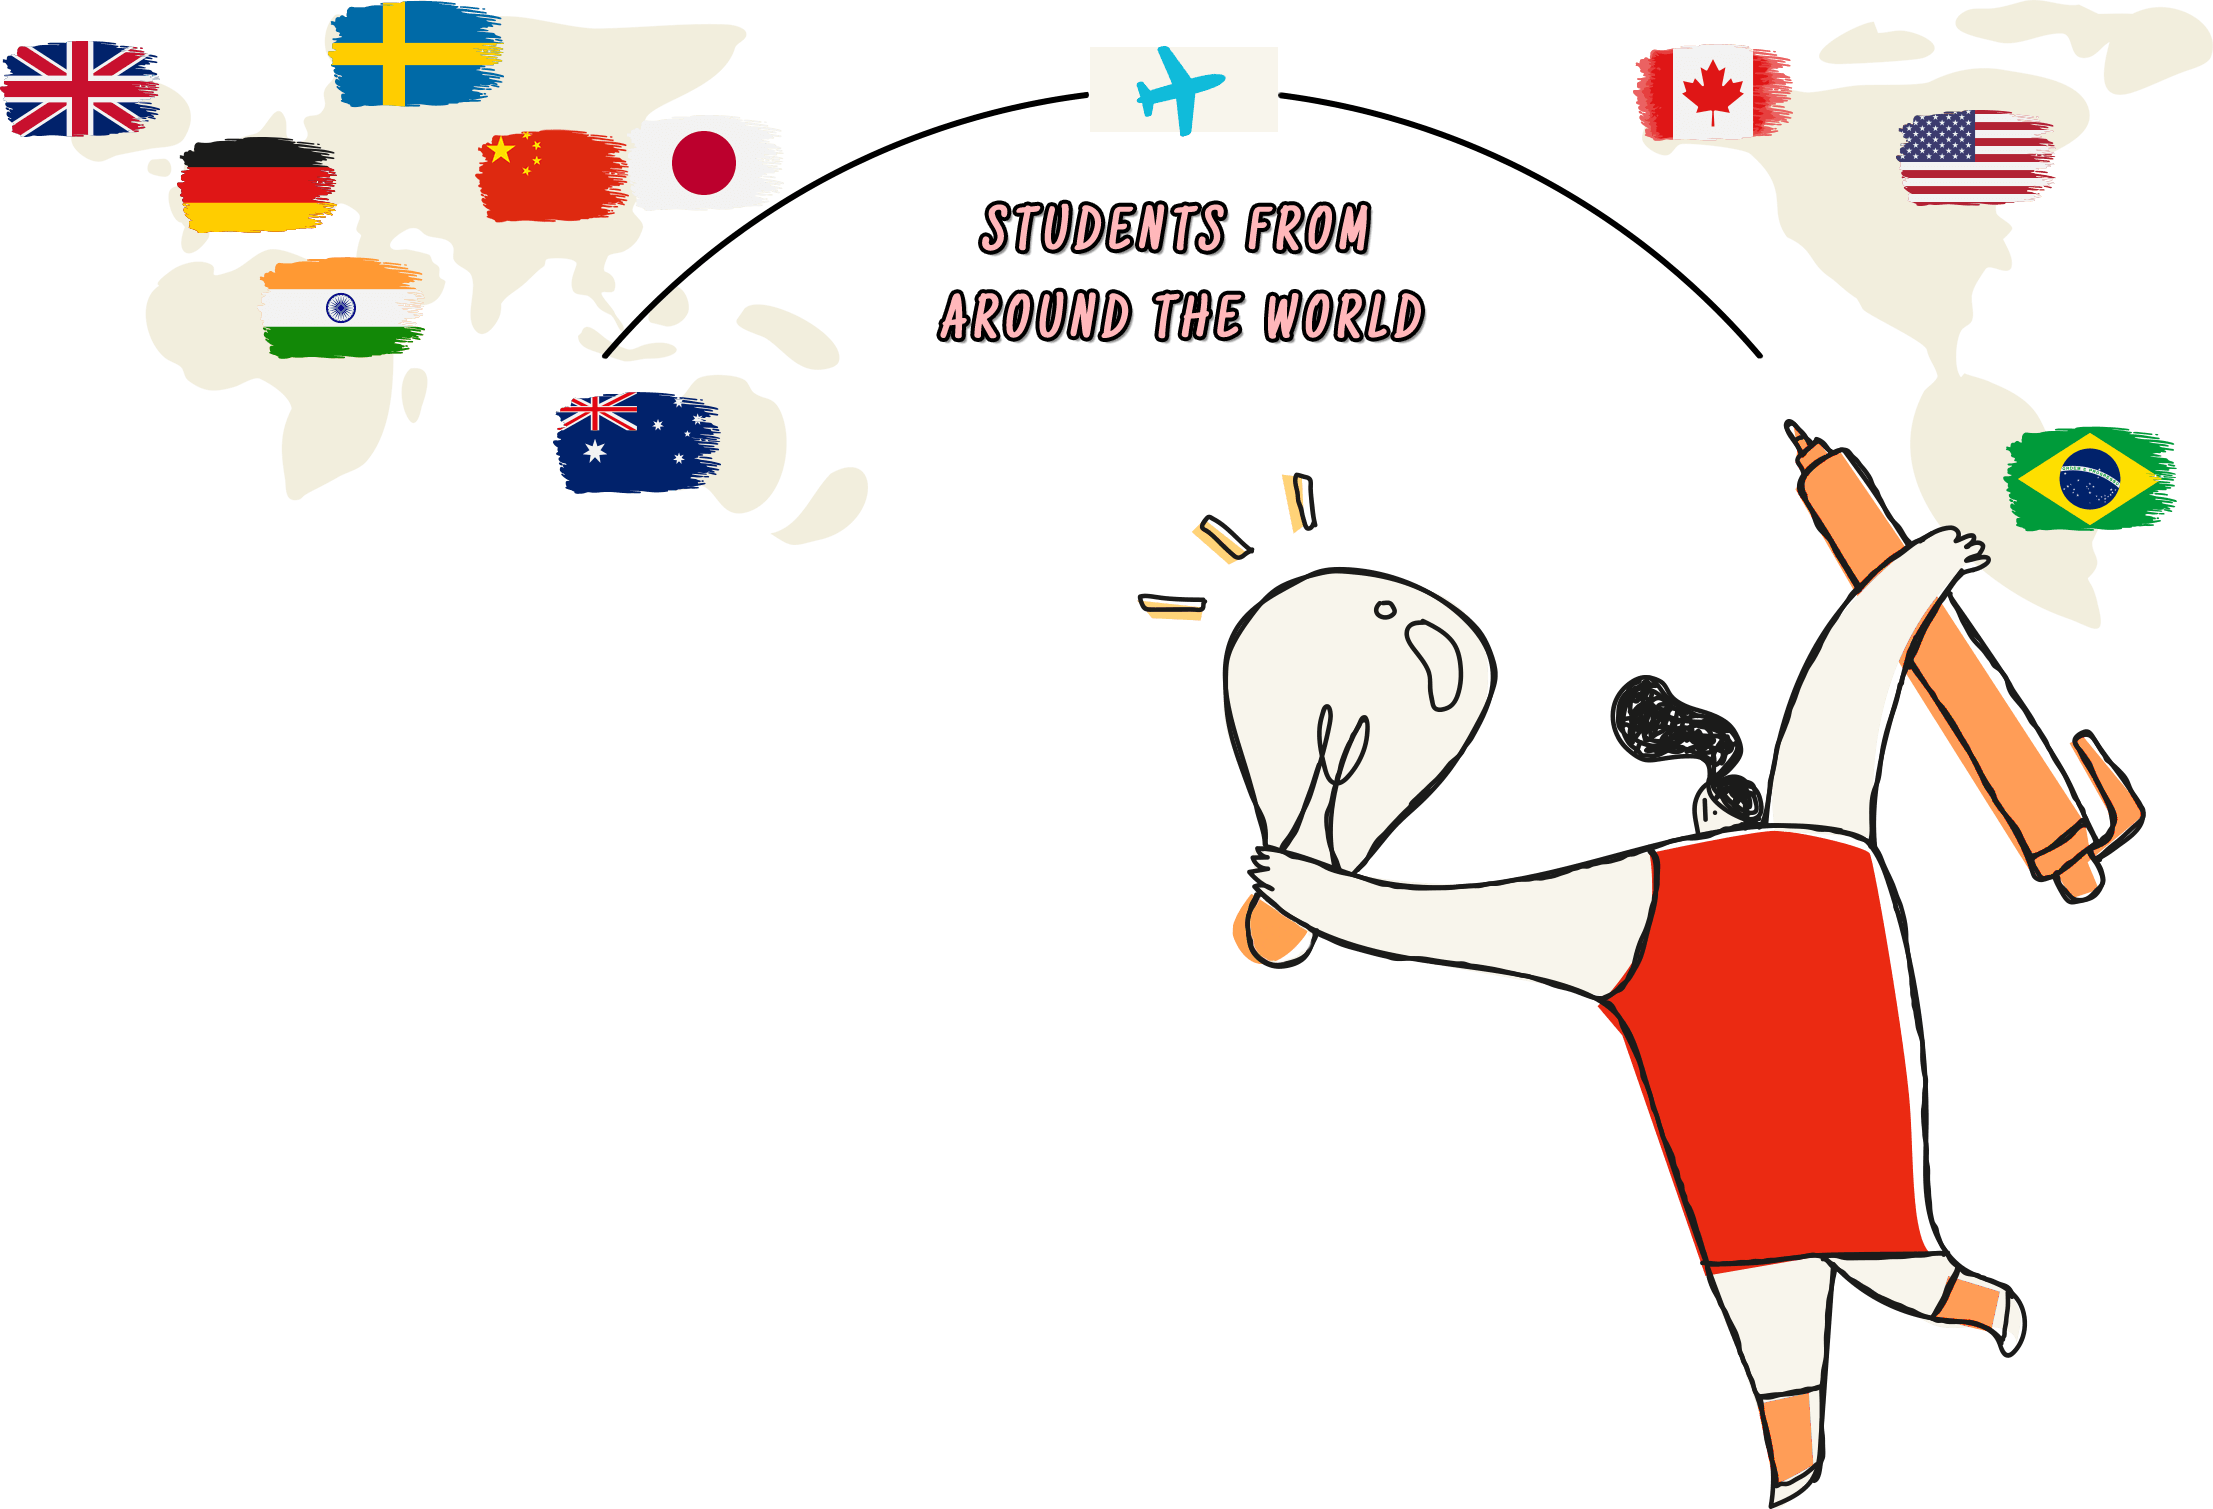 STUDENTS FROM AROUND THE WORLD